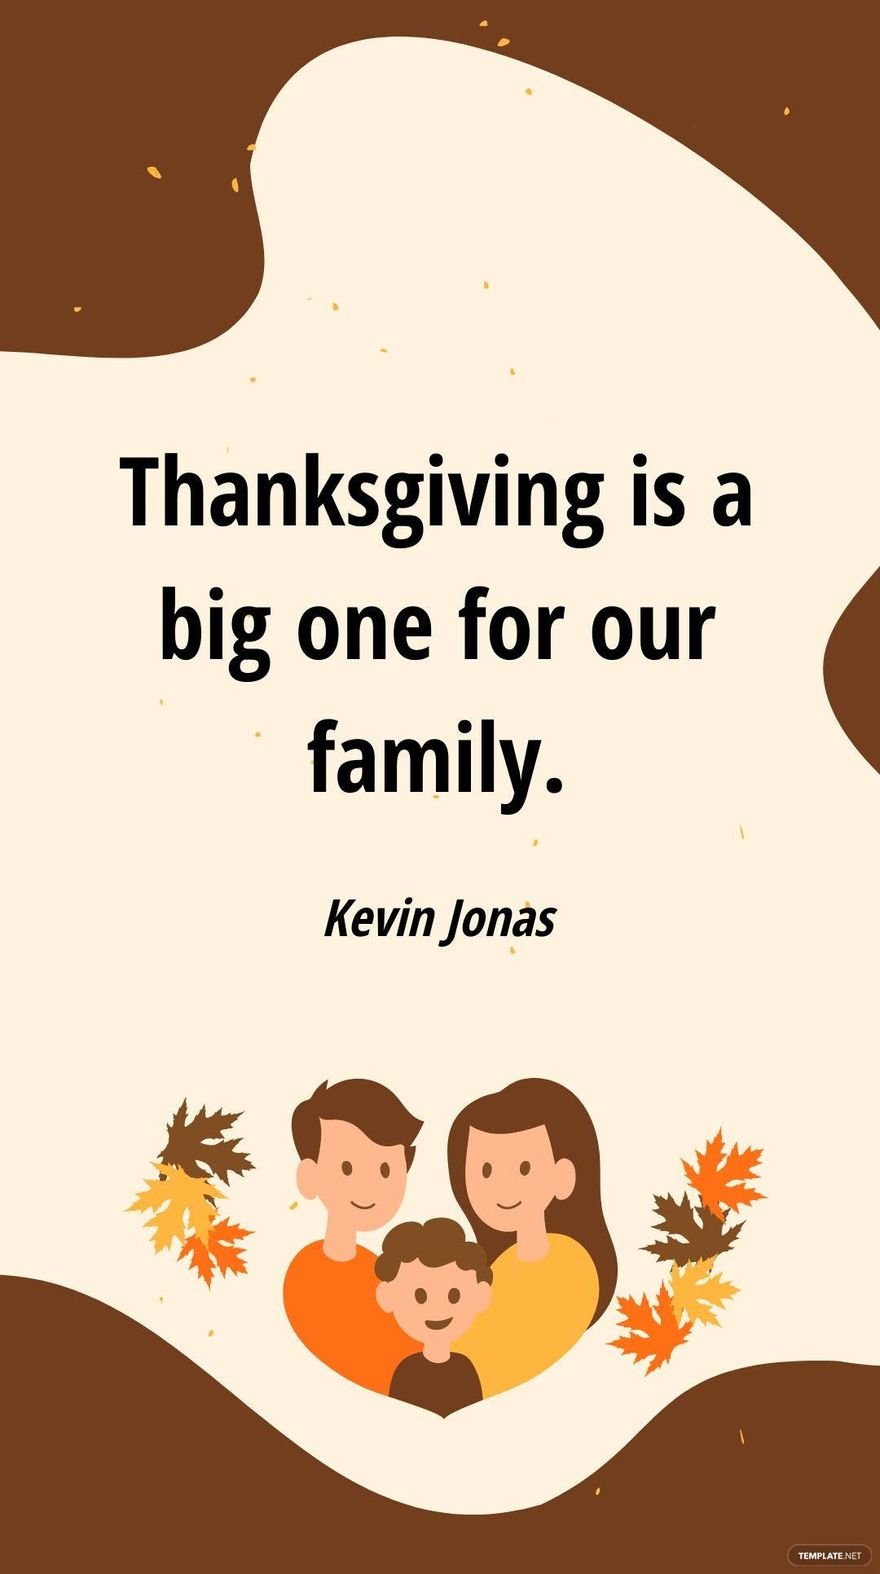 Kevin Jonas - Thanksgiving is a big one for our family.